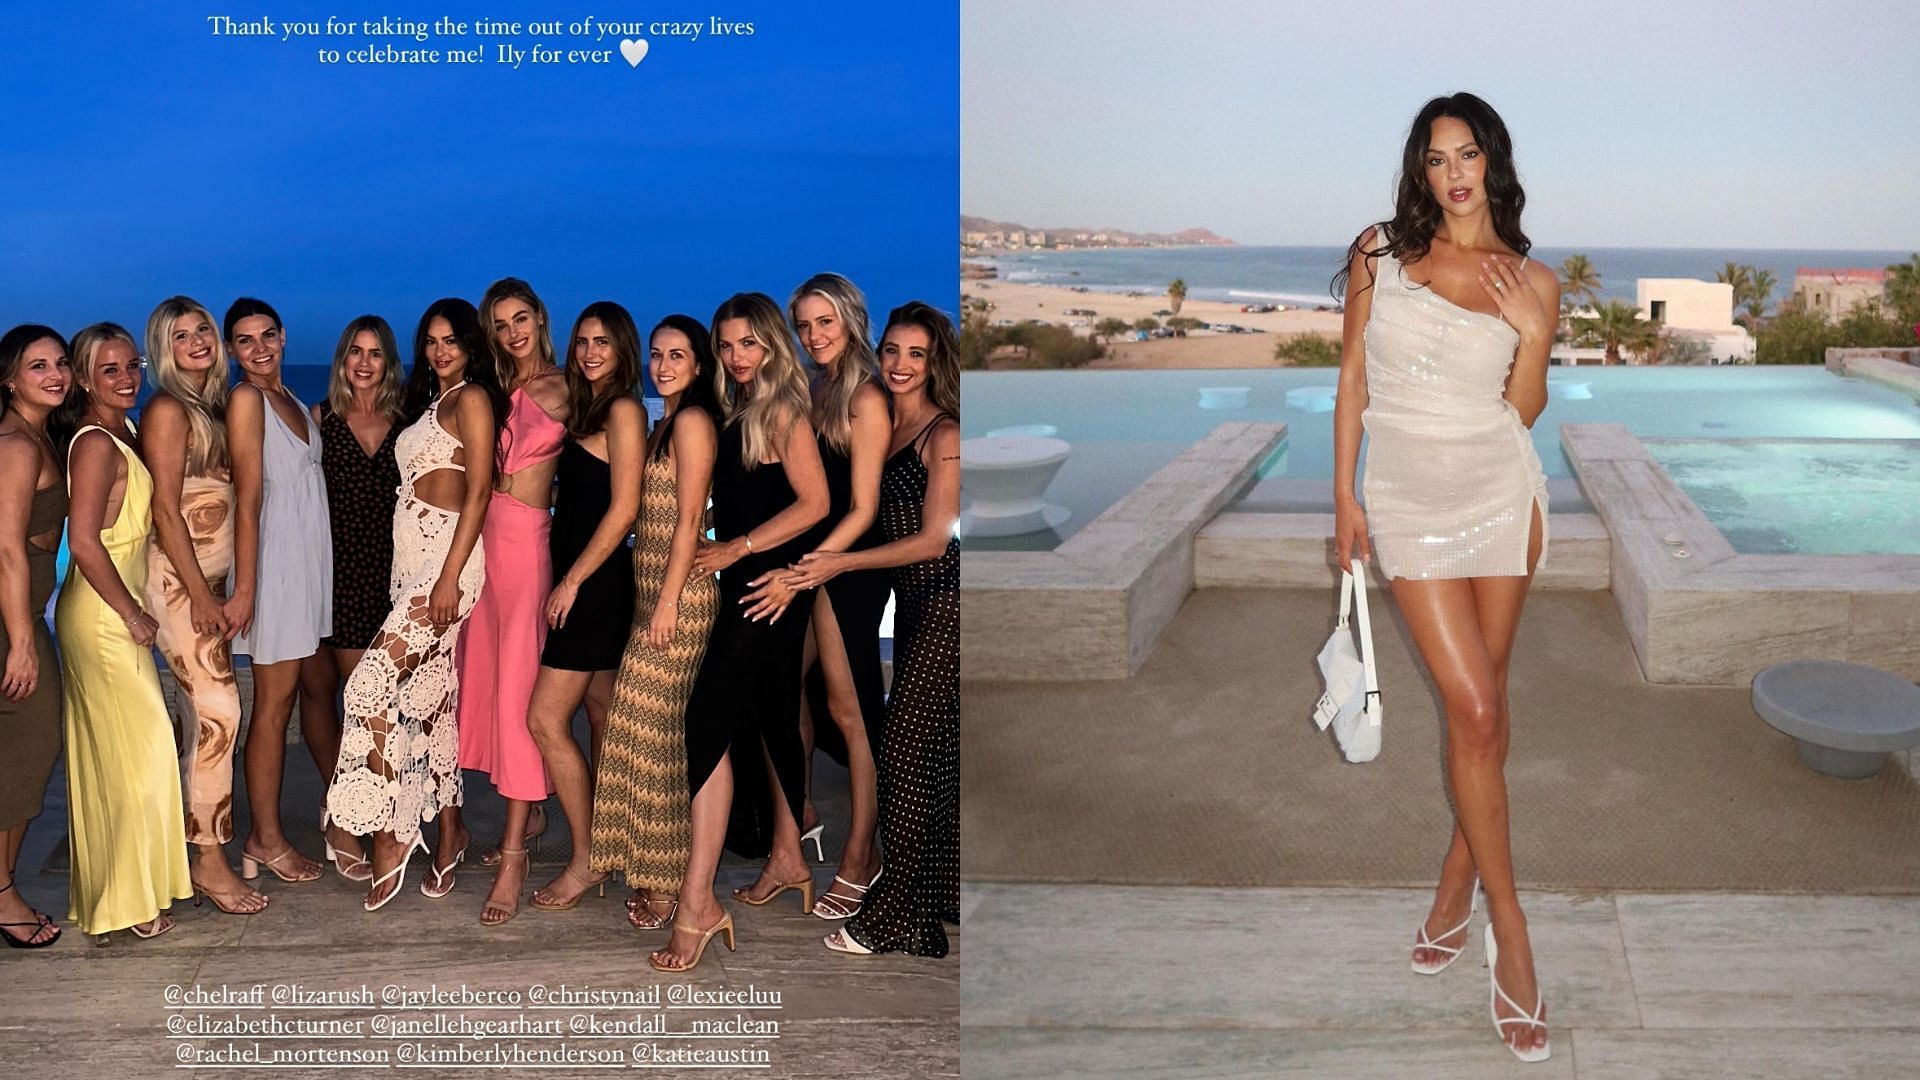 Christen Harper shared photos from her bachelorette party in Cabo San Lucas, Mexico.